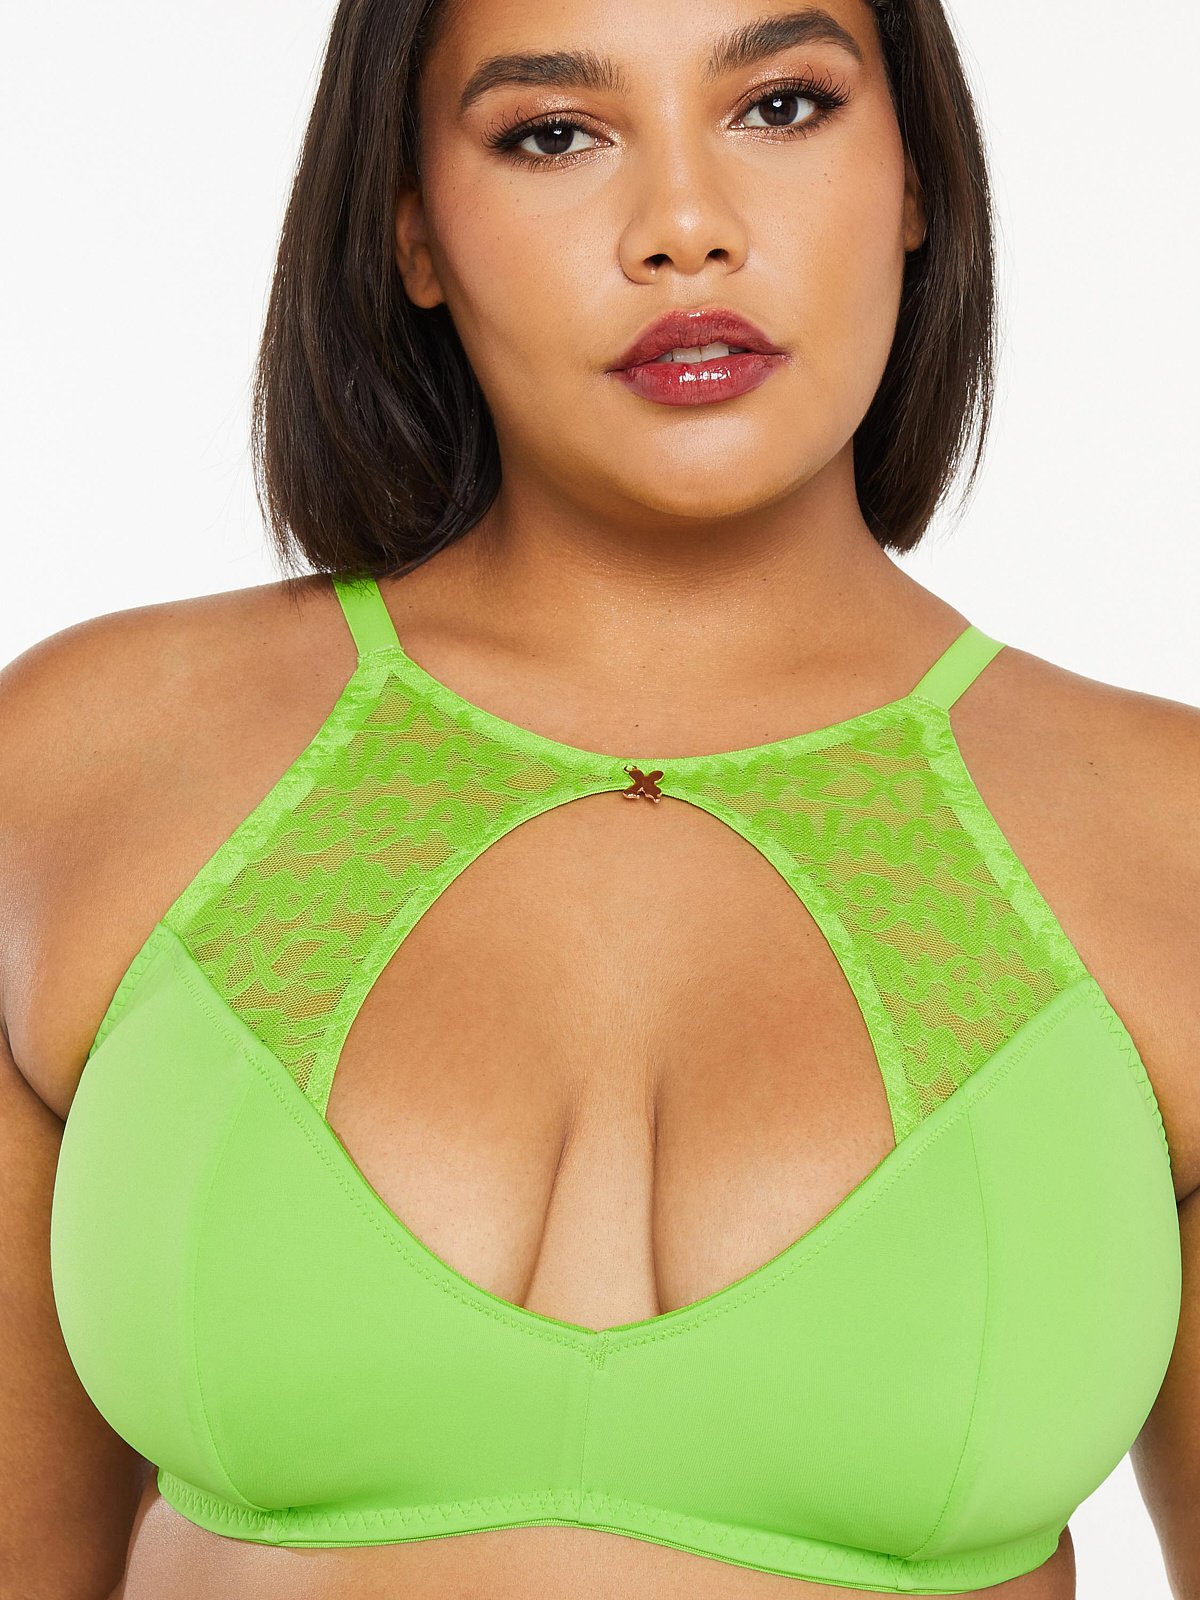 Tops, I Have 4x Savage X Fenty Bras Sized 44d 1 Neon Green One Purple And  2 Black